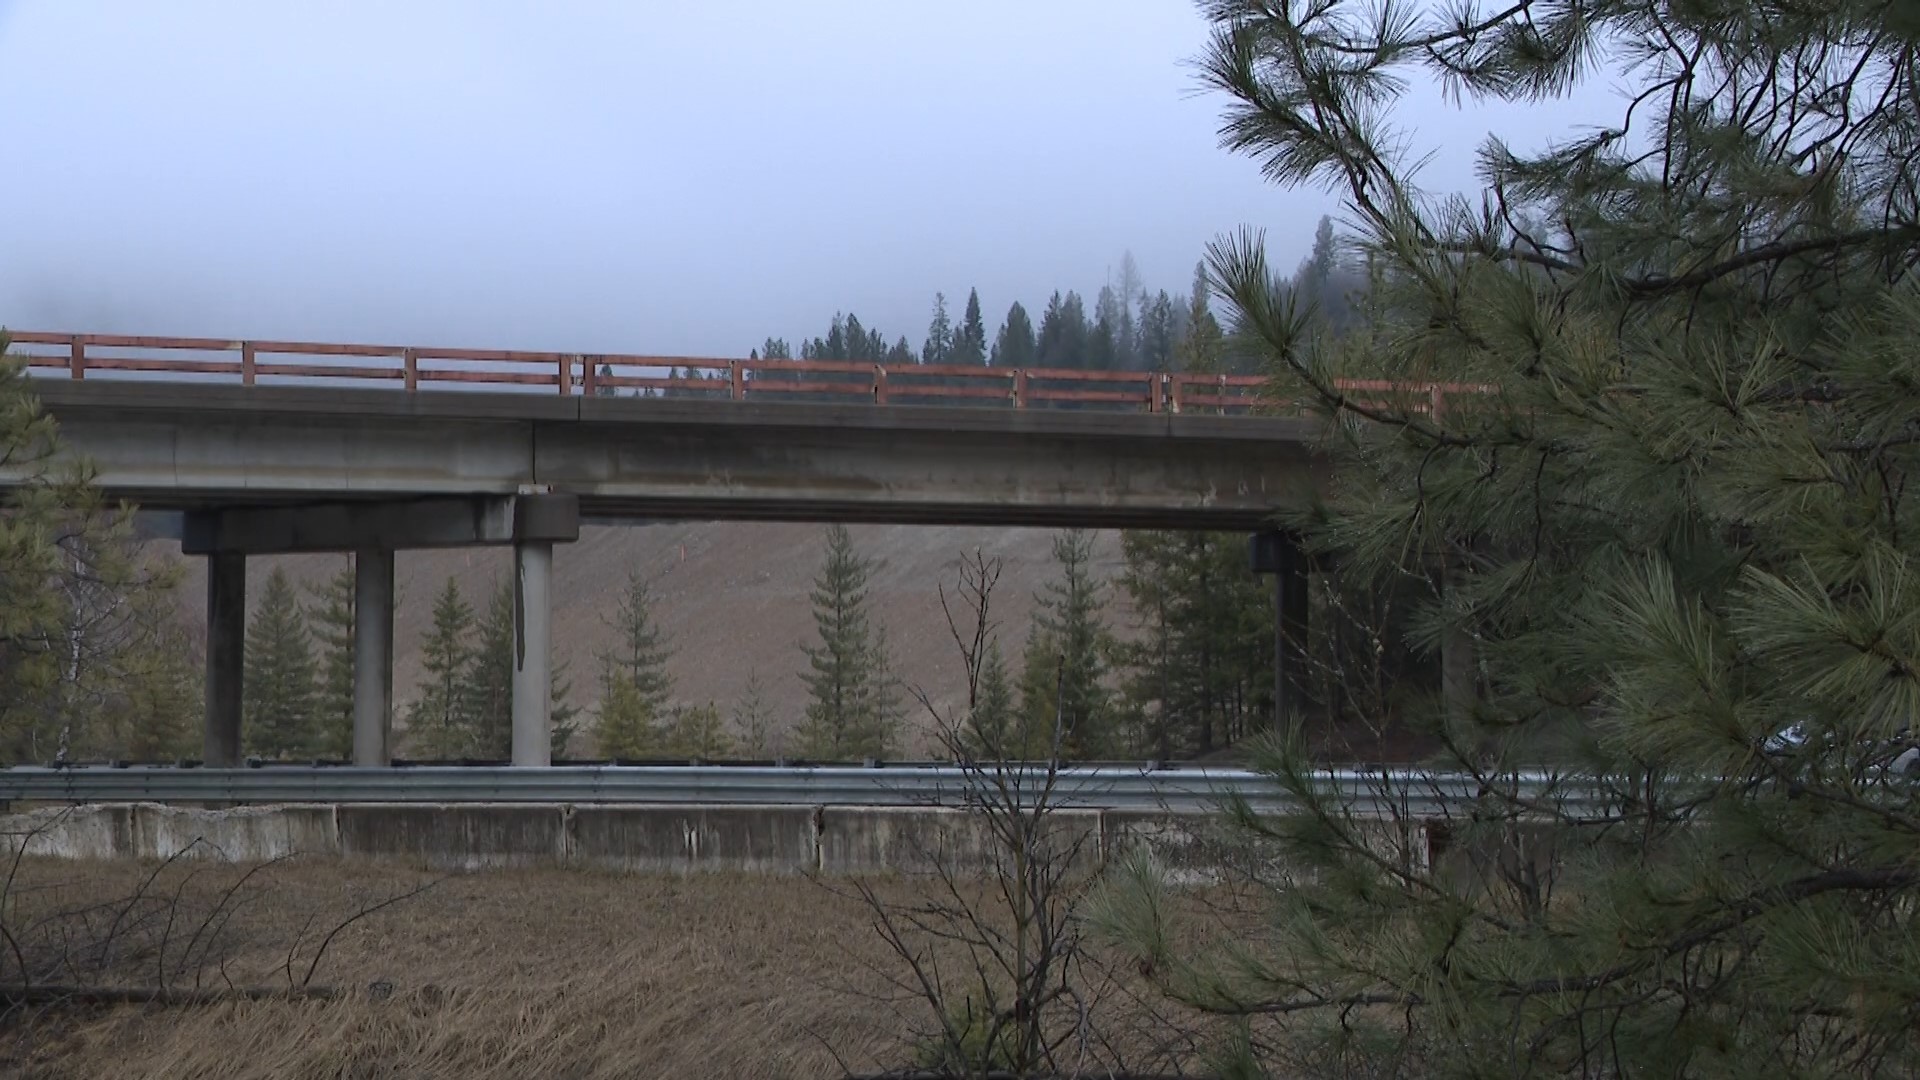 The bridge to nowhere crosses I-90 in Osburn, Idaho. More than 50 years after it was abandoned, the bridge will finally welcome traffic - of the animal variety.